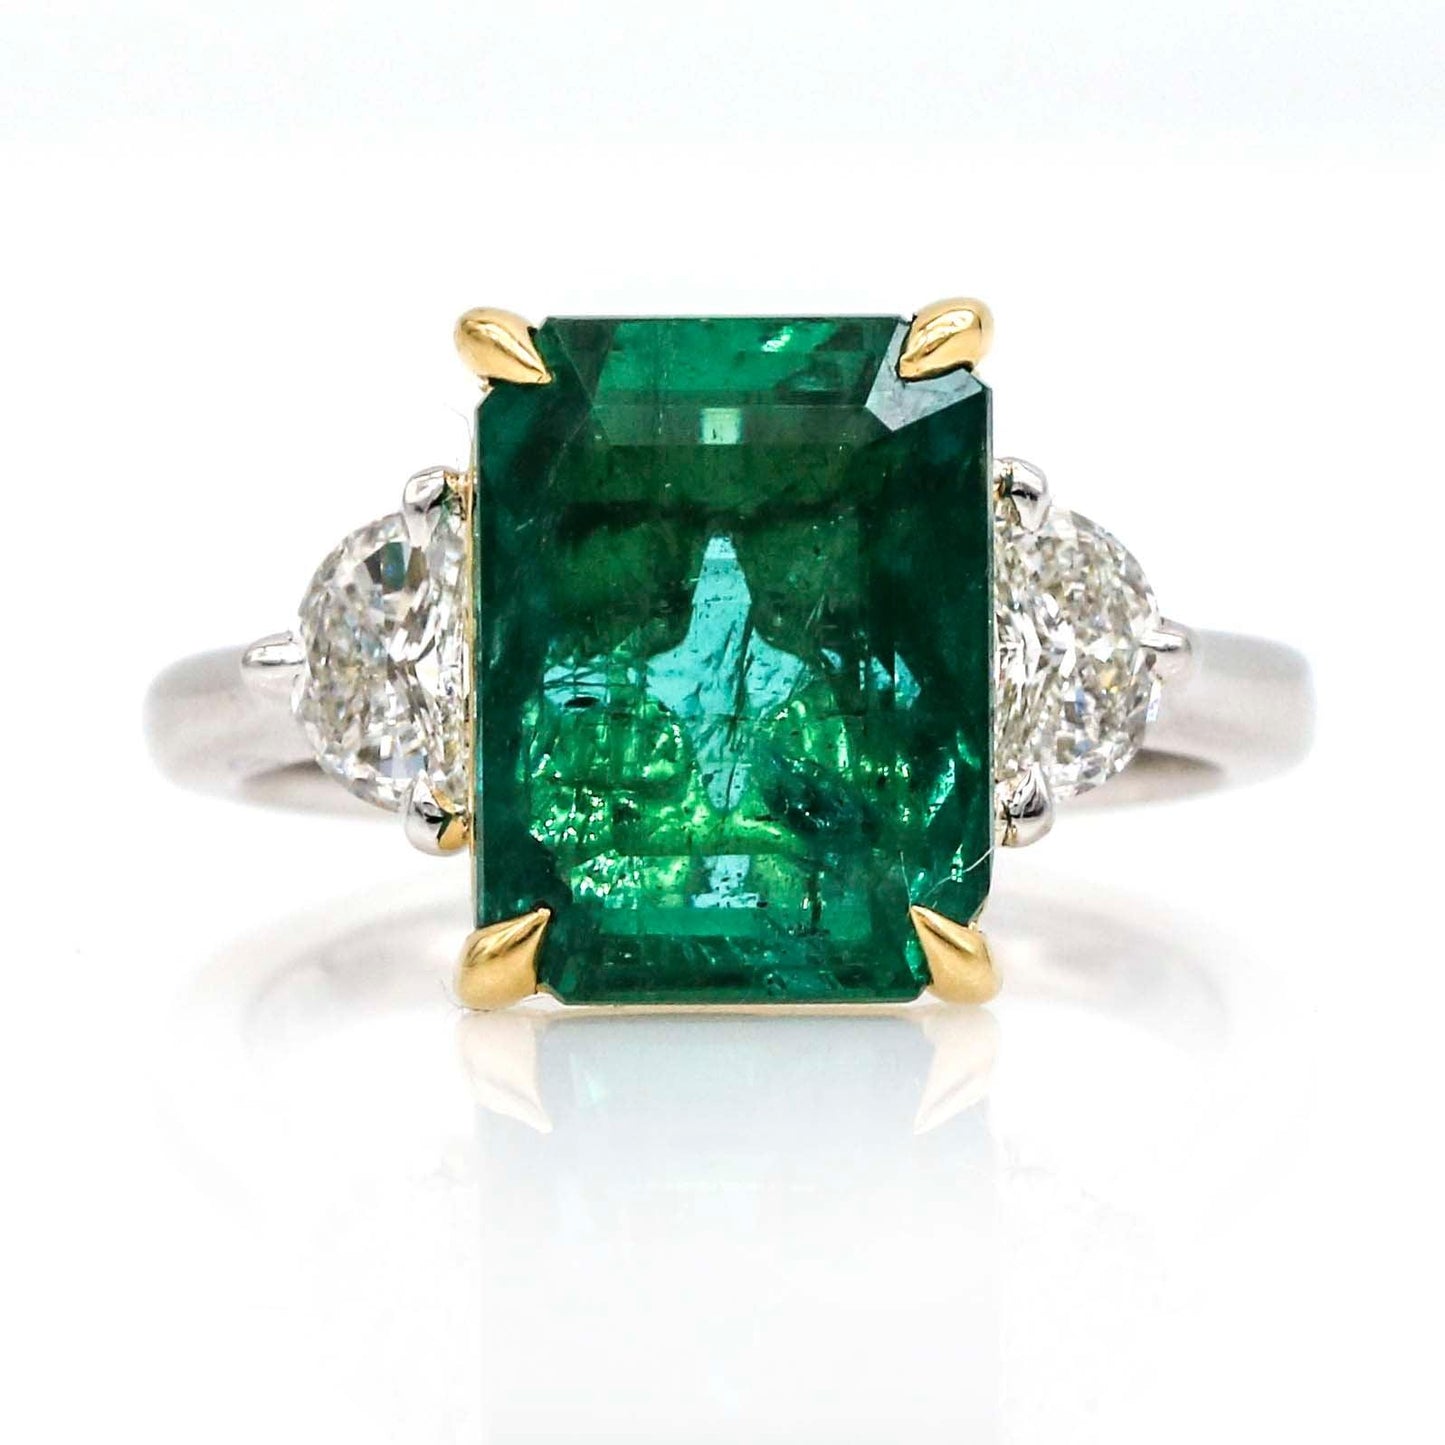 5.80 ct Emerald and Diamond Statement Ring in Platinum and 18k Yellow Gold - 31 Jewels Inc.